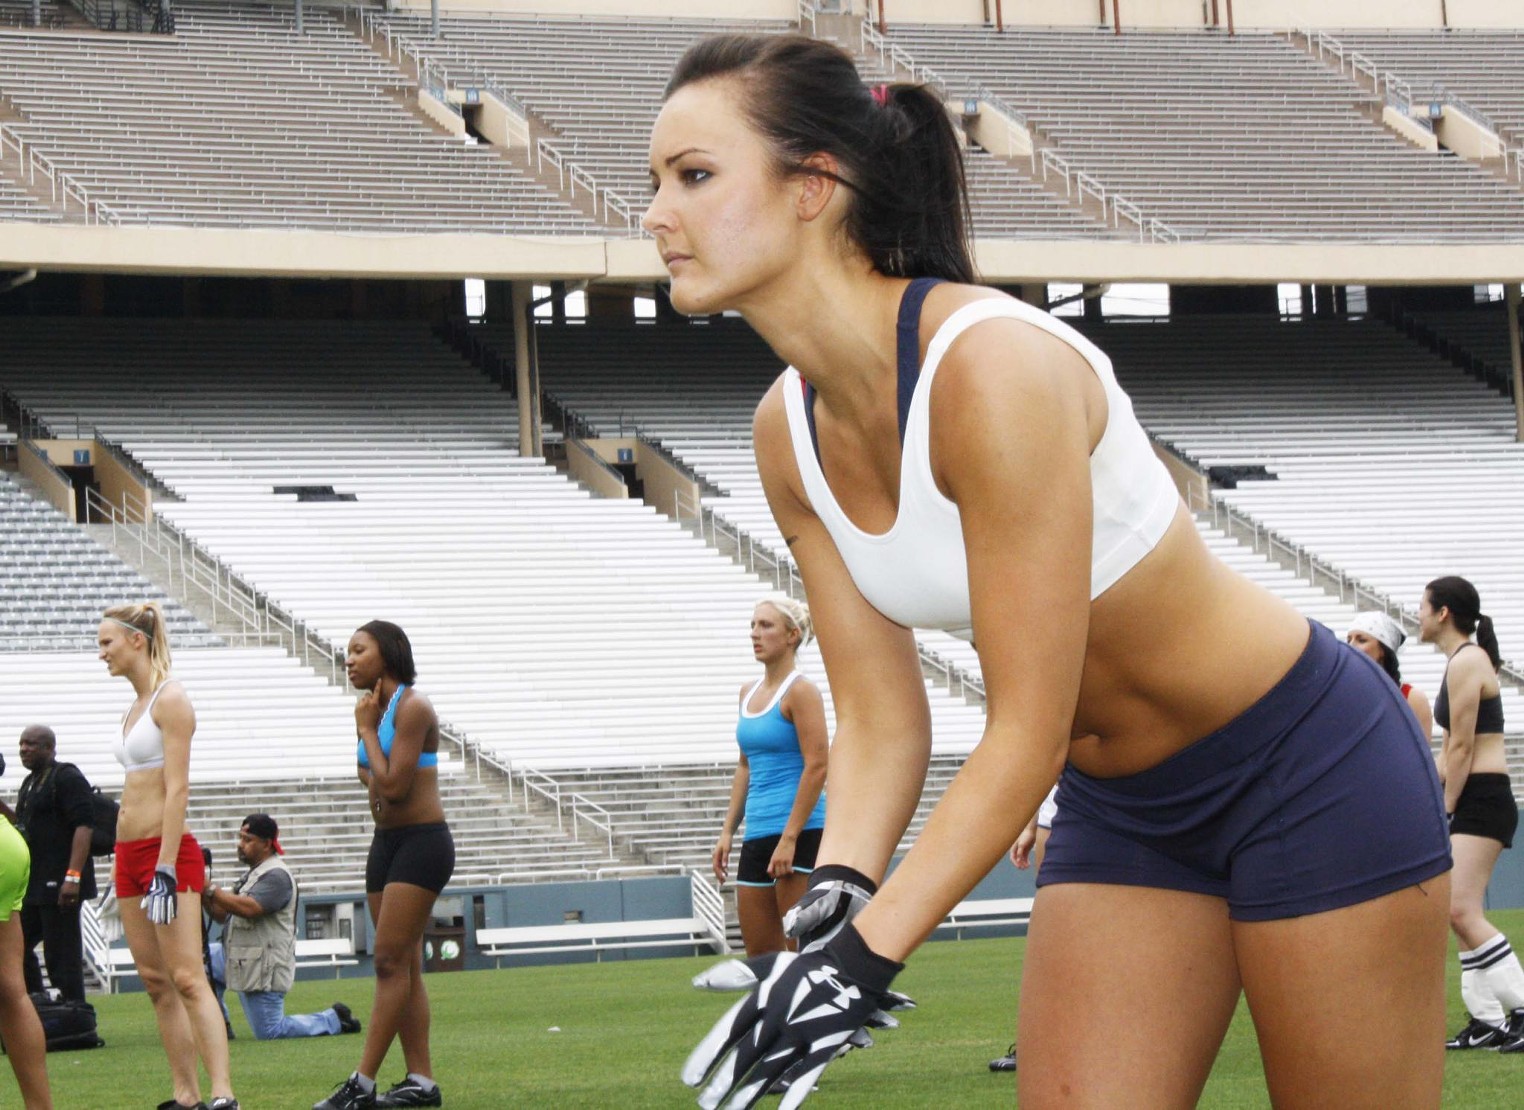 Lingerie Football League Tryouts Dallas Dallas Observer The Leading Independent News